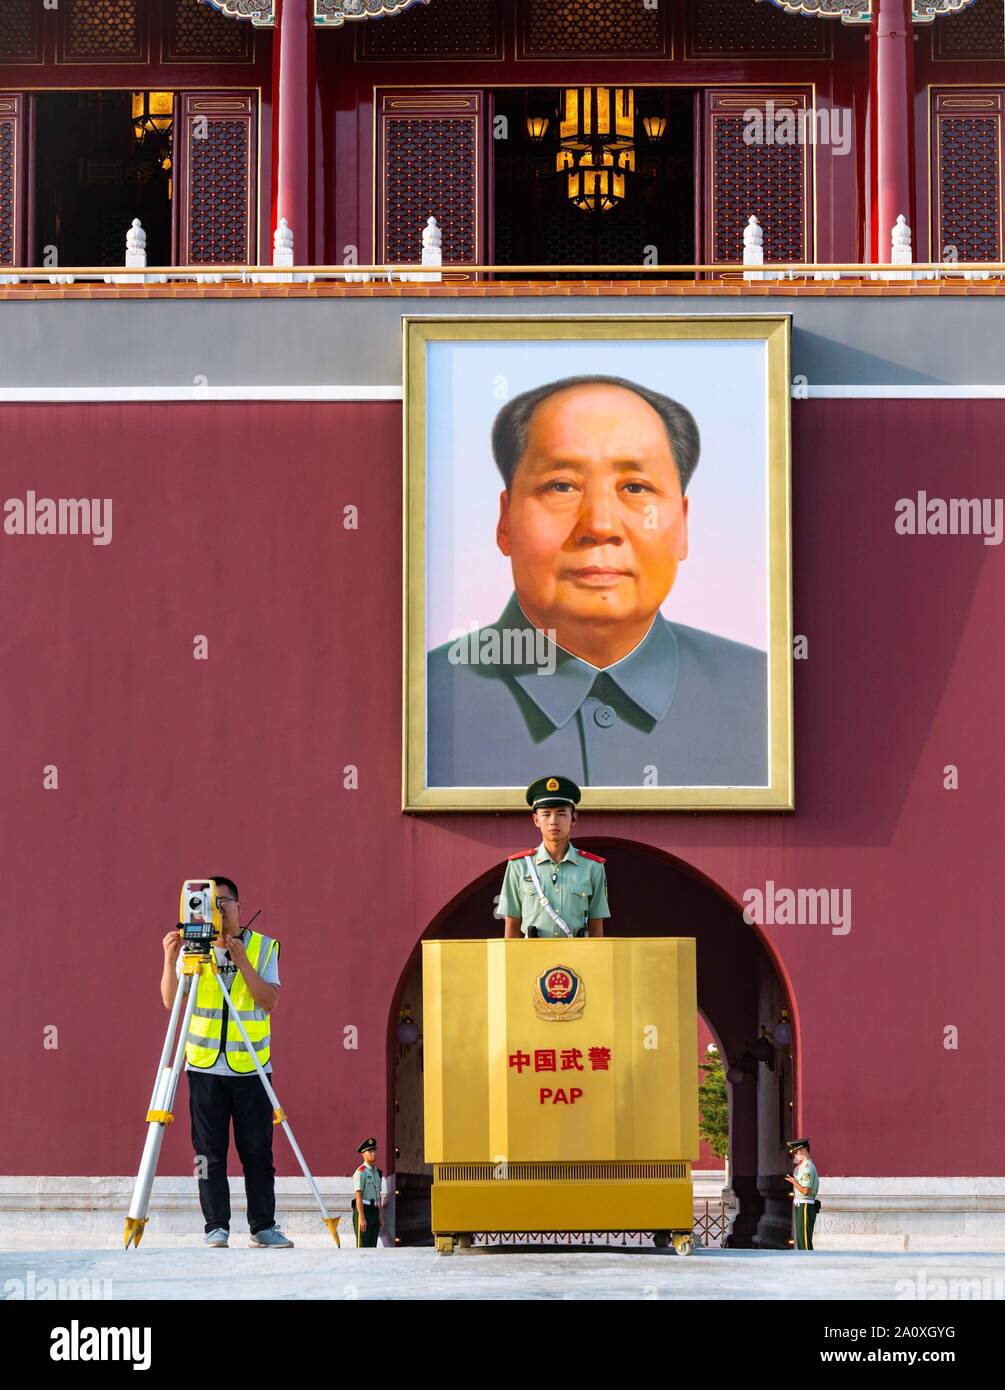 People’s Republic of China 70th anniversary preparations on October 1st 2019, Tiananmen Square, Beijing with soldier guarding Forbidden City gate Stock Photo